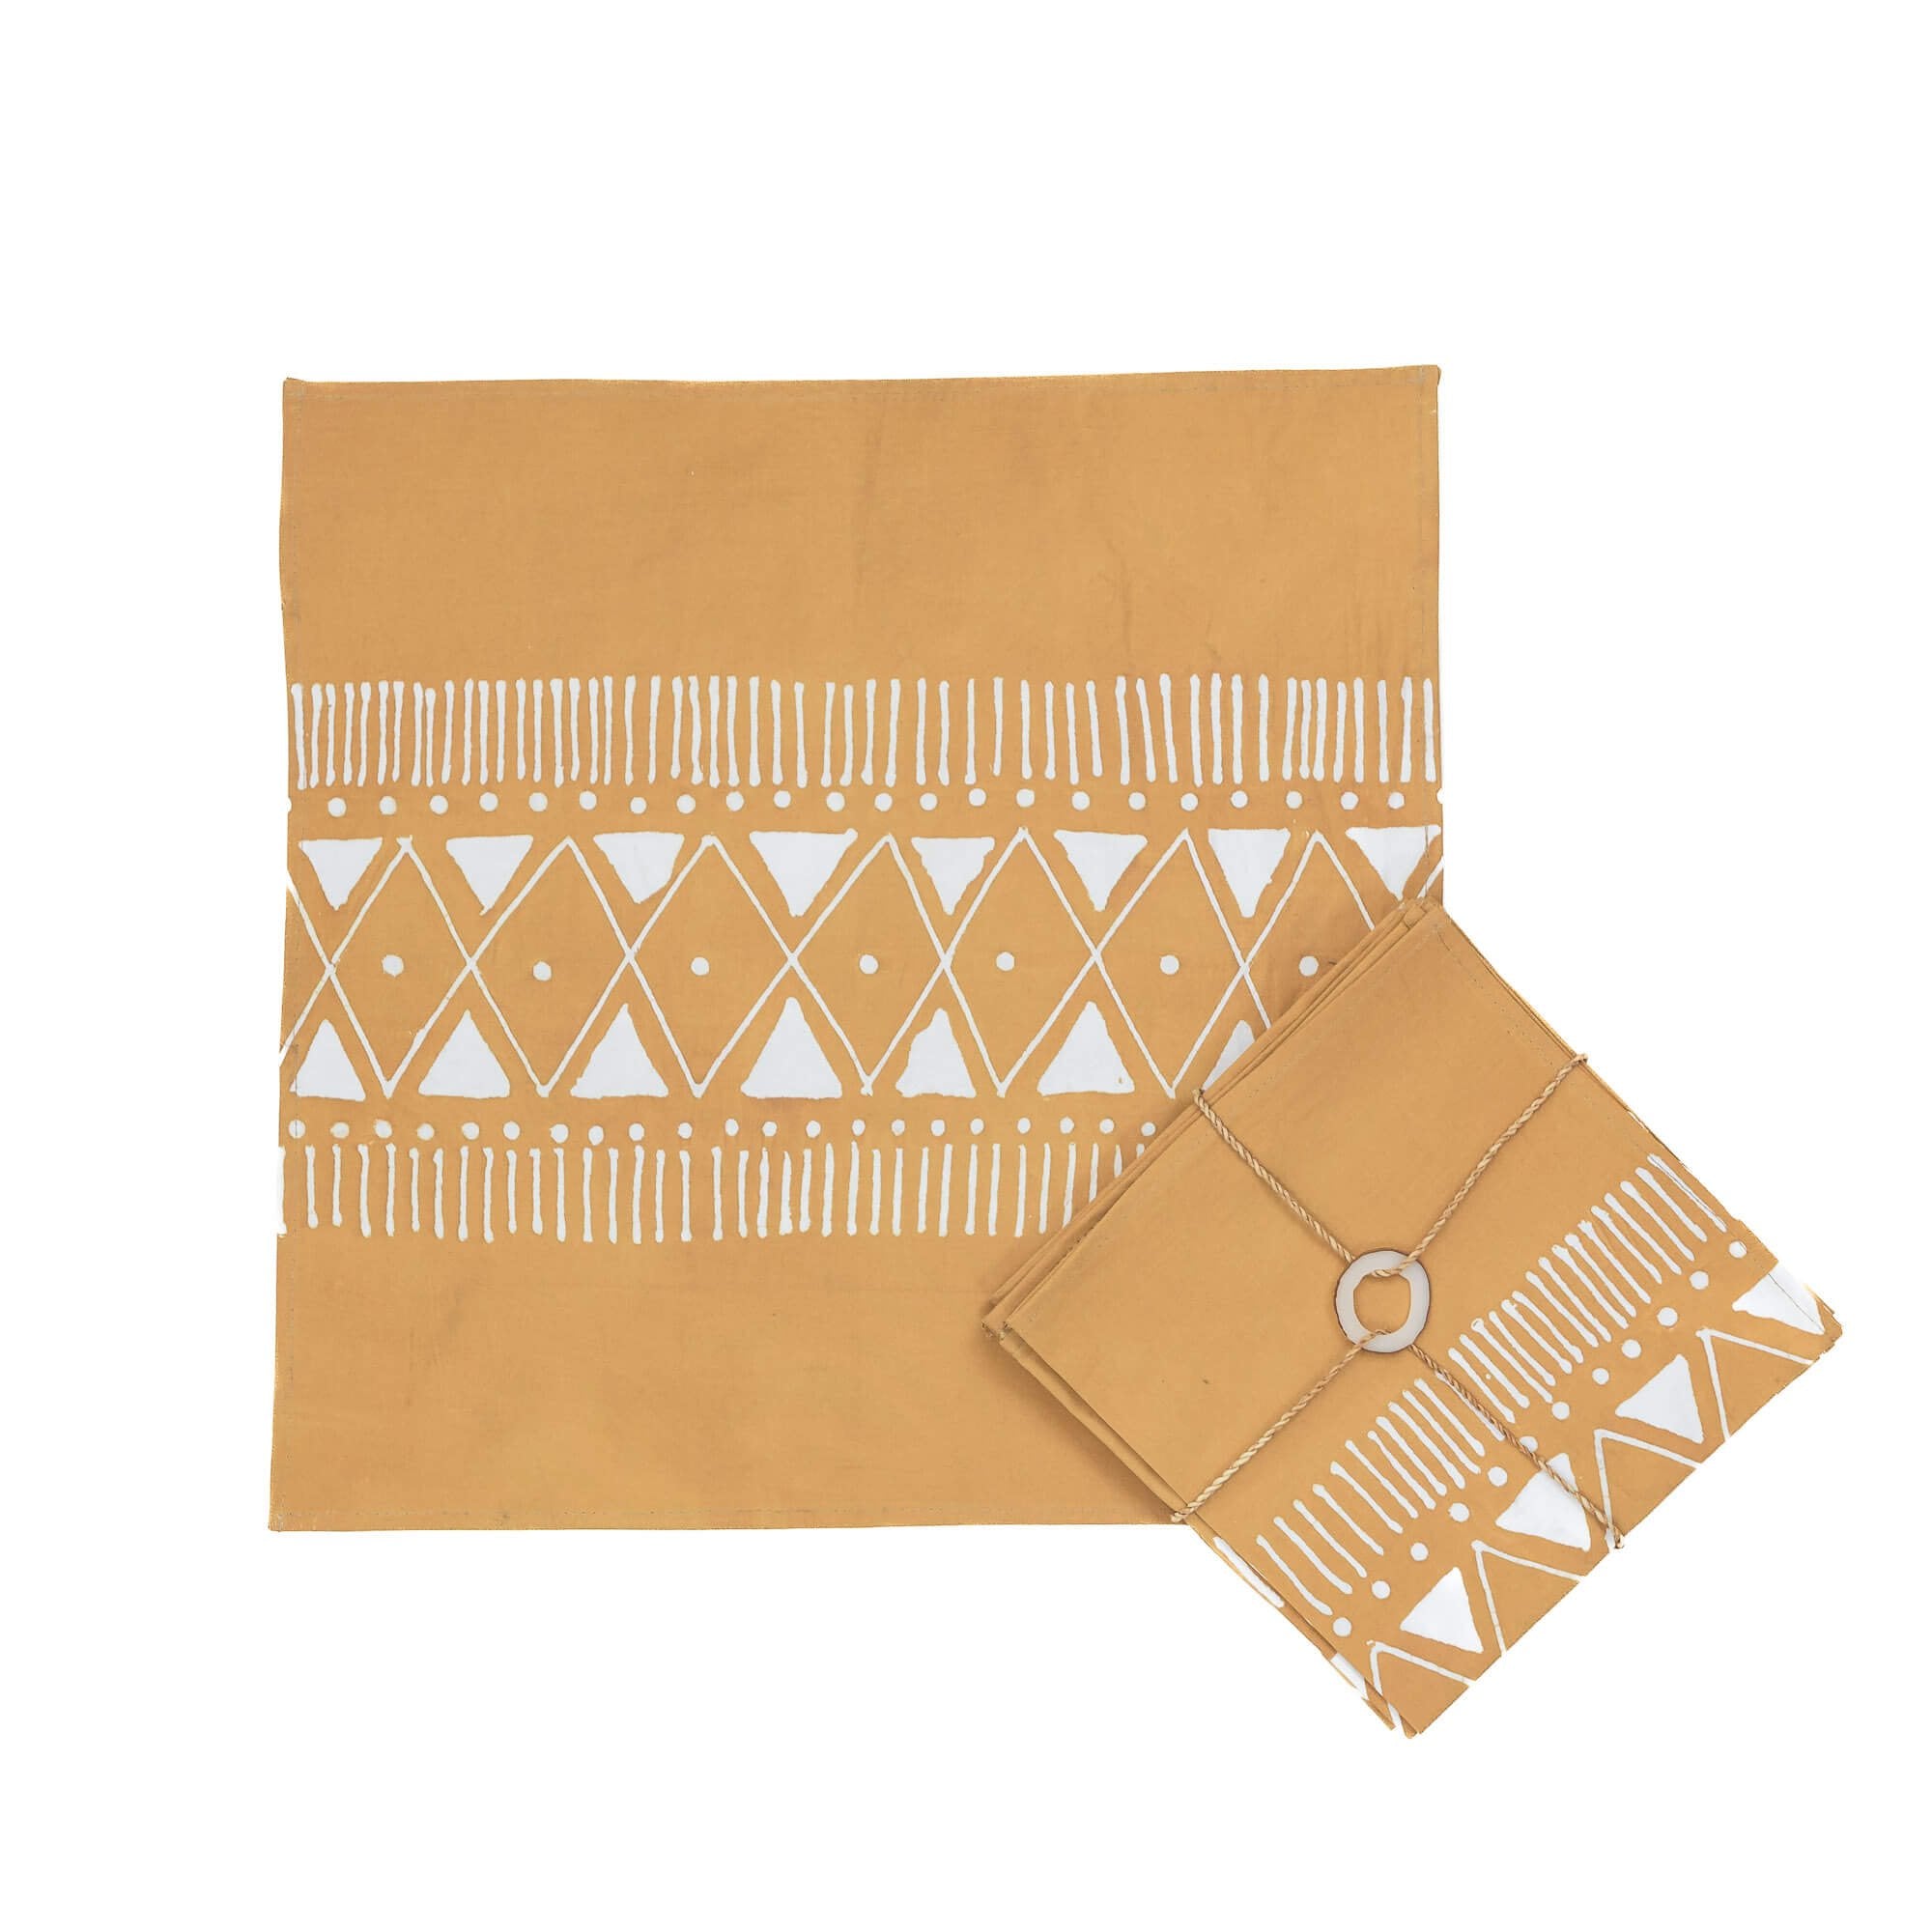 Matika Mustard Linear Napkin Set - Handmade by TRIBAL TEXTILES - Handcrafted Home Decor Interiors - African Made